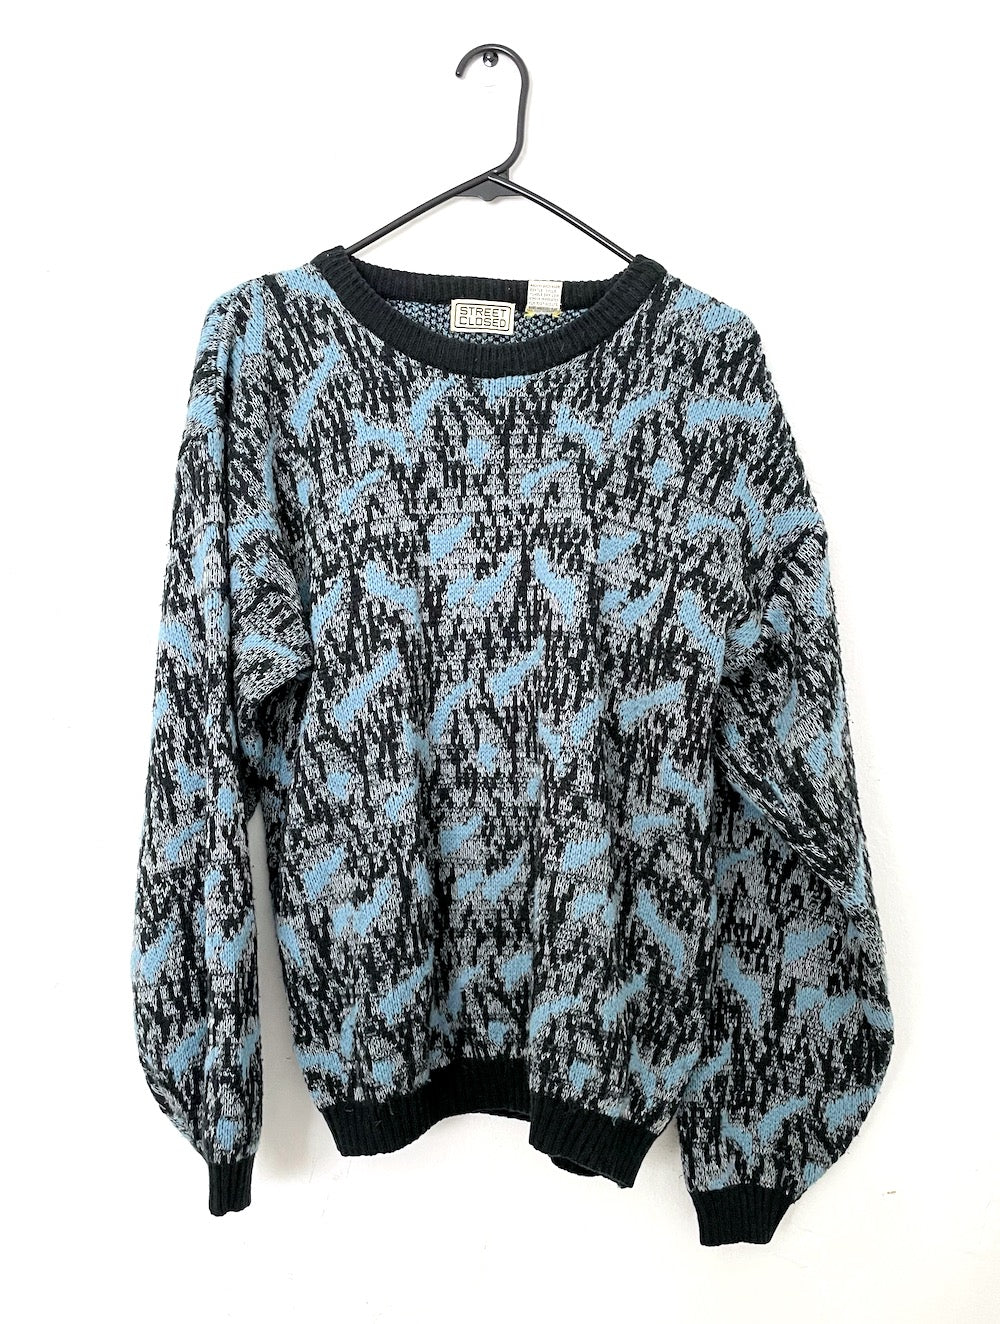 Vintage 80s Cozy Oversized Black and Blue Abstract design Graphic Sweater